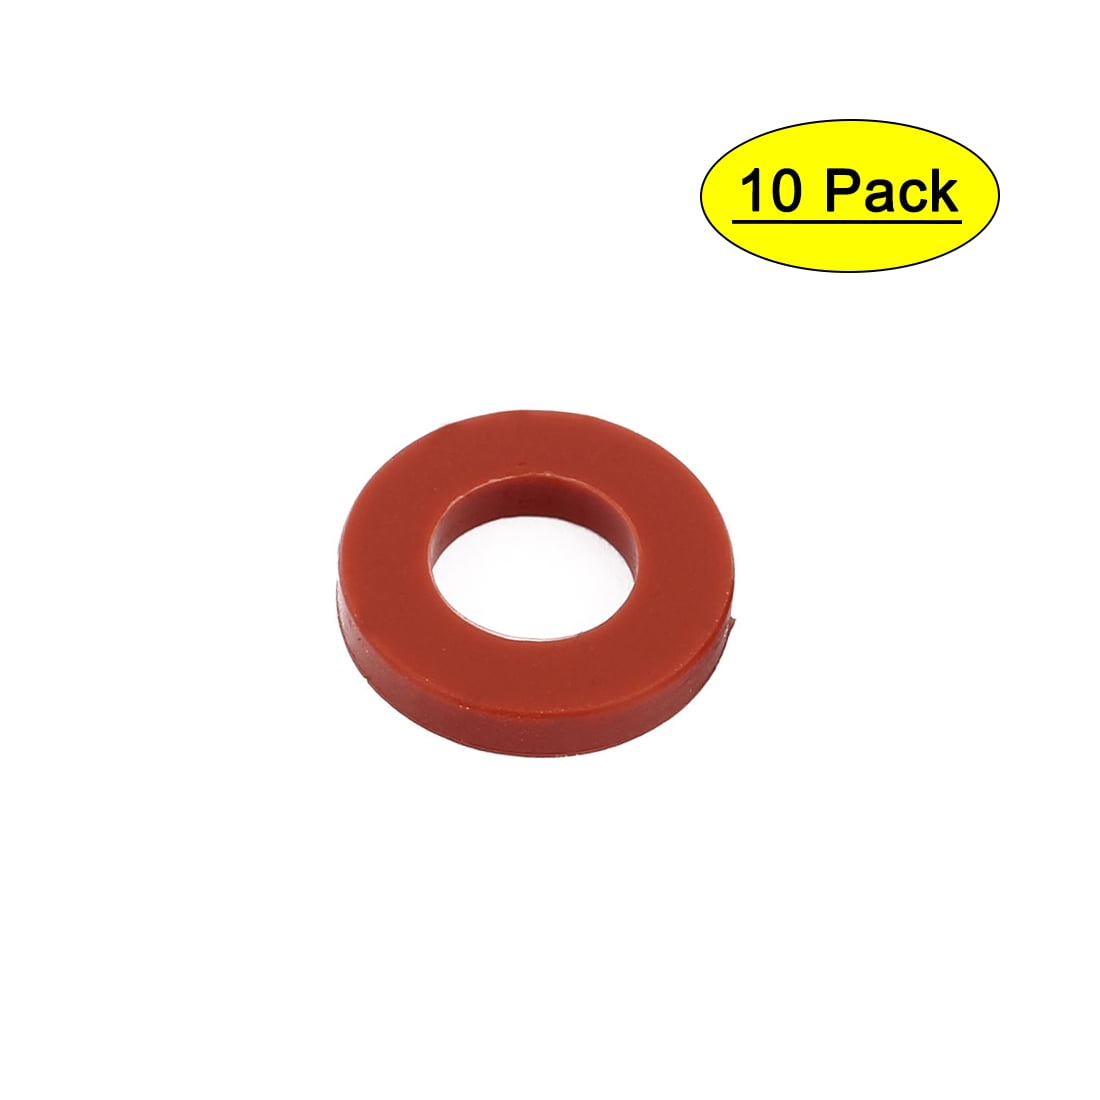 Gaskets 12pcs Flat Gasket White Silicone O-Ring Sealing Washers for Pipe Water Tap Sprayer Connection 6